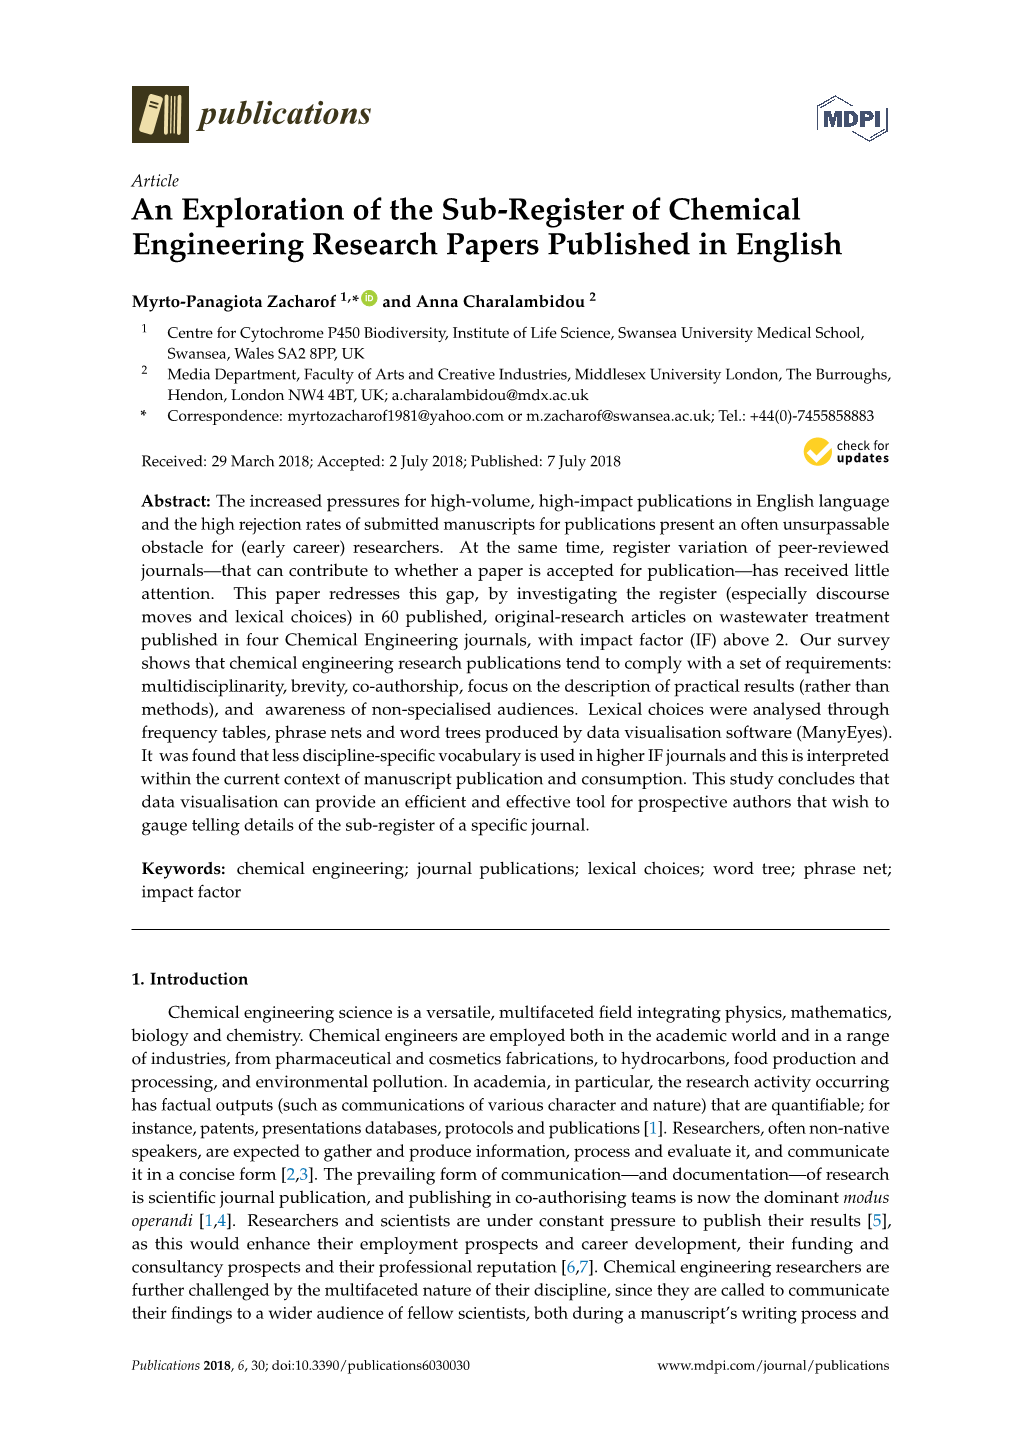 An Exploration of the Sub-Register of Chemical Engineering Research Papers Published in English